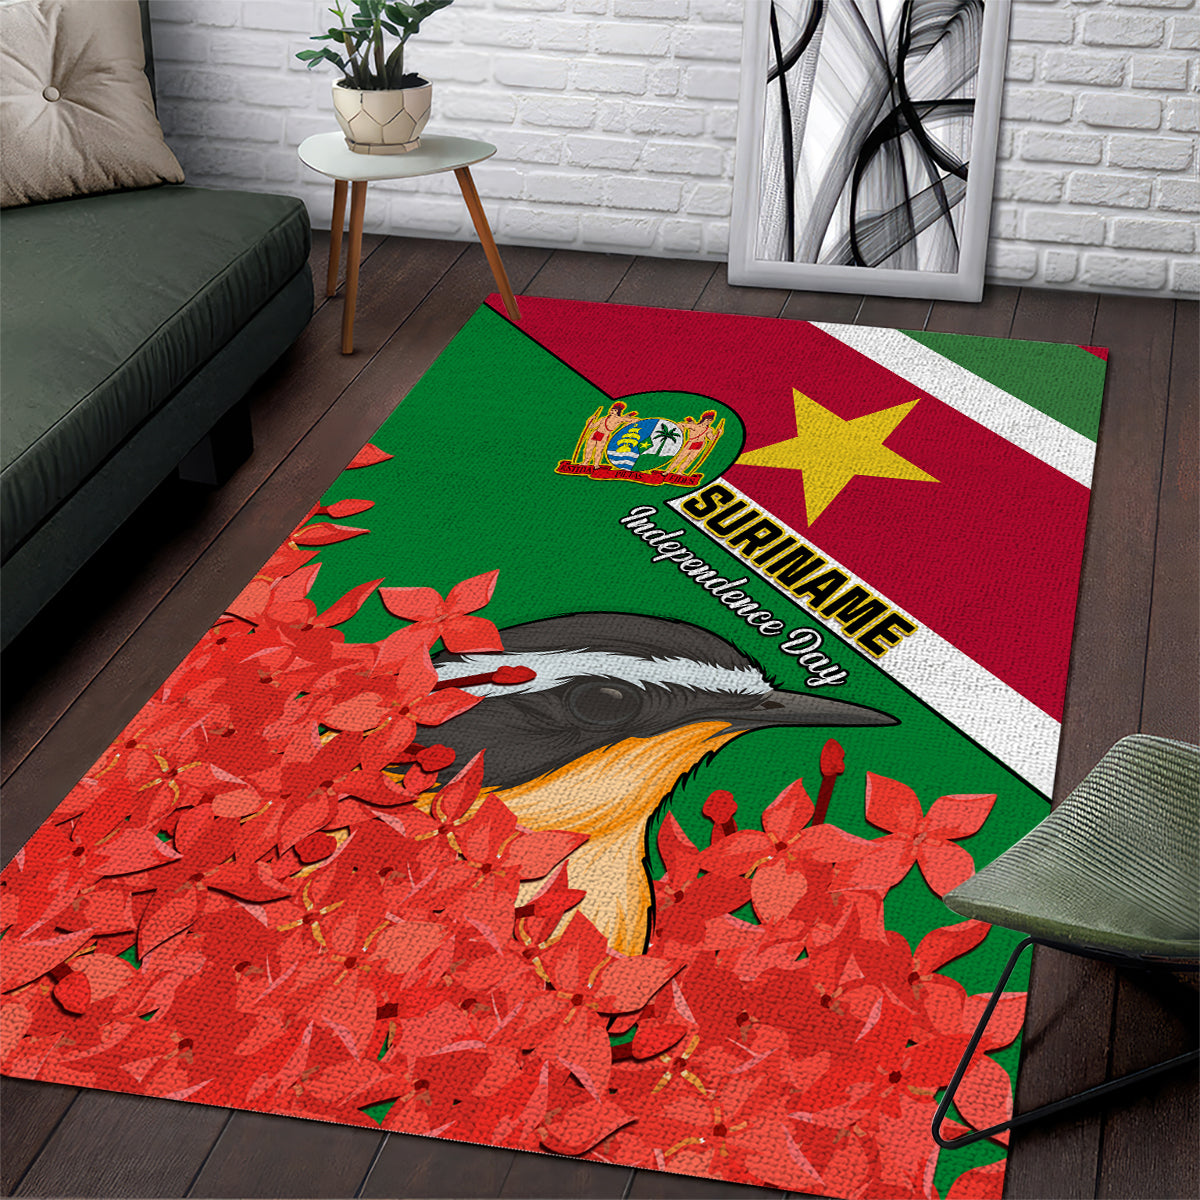 personalised-suriname-independence-day-area-rug-lesser-kiskadee-with-scarlet-jungle-flame-flower